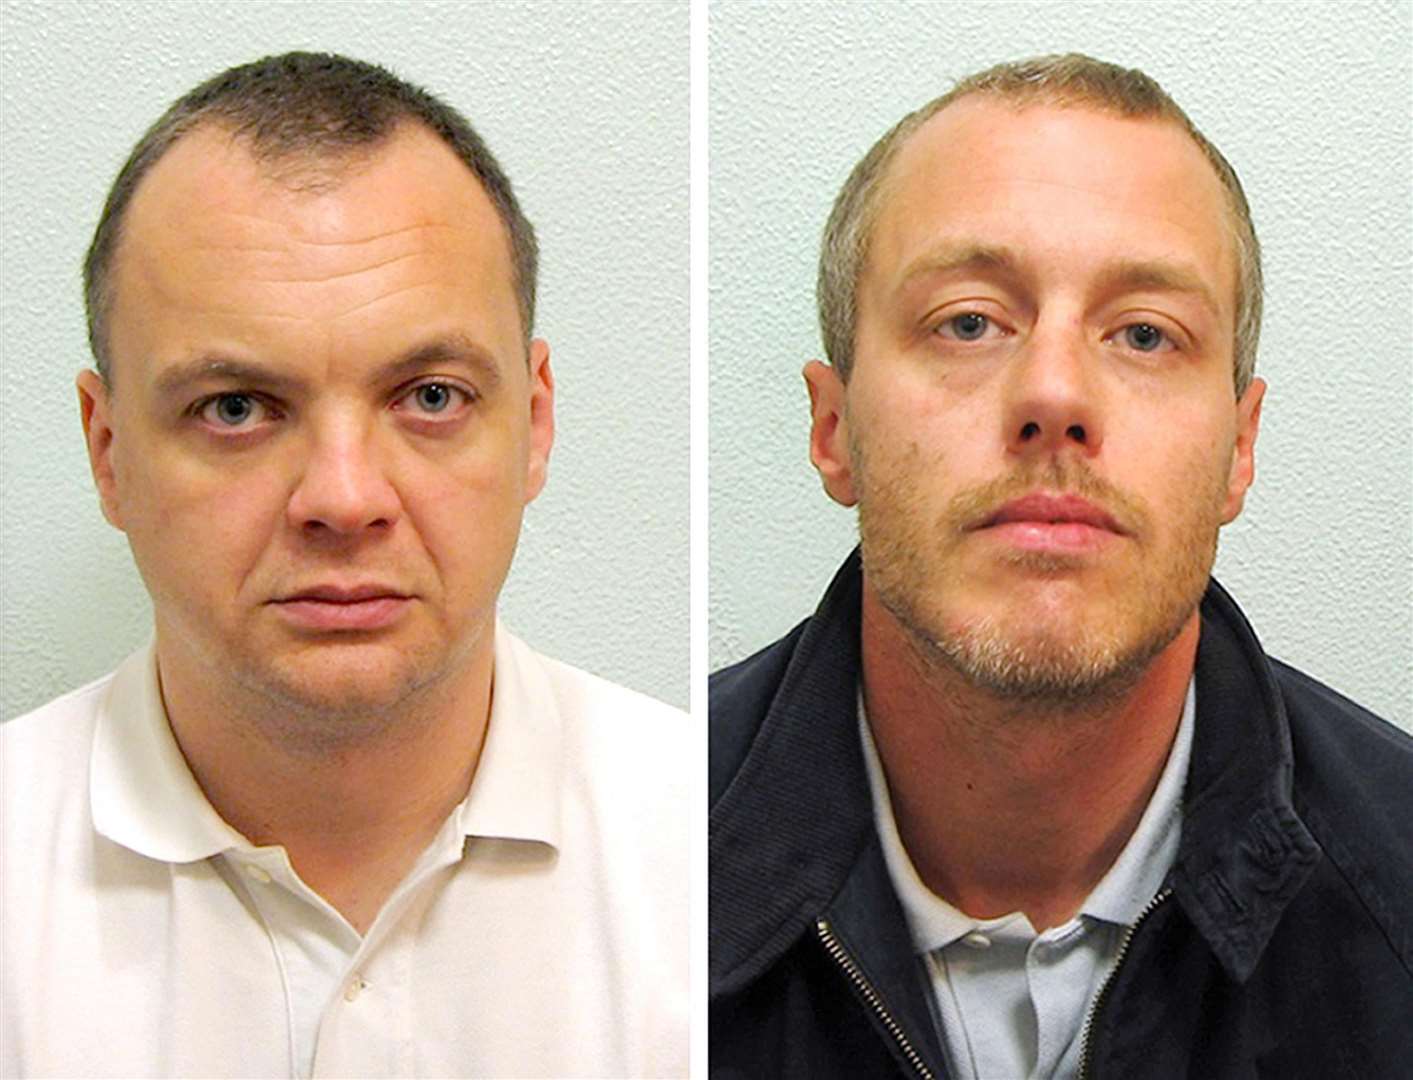 Gary Dobson (left) and David Norris who were convicted under joint enterprise in 2012 for the 1993 murder of Stephen Lawrence (PA)